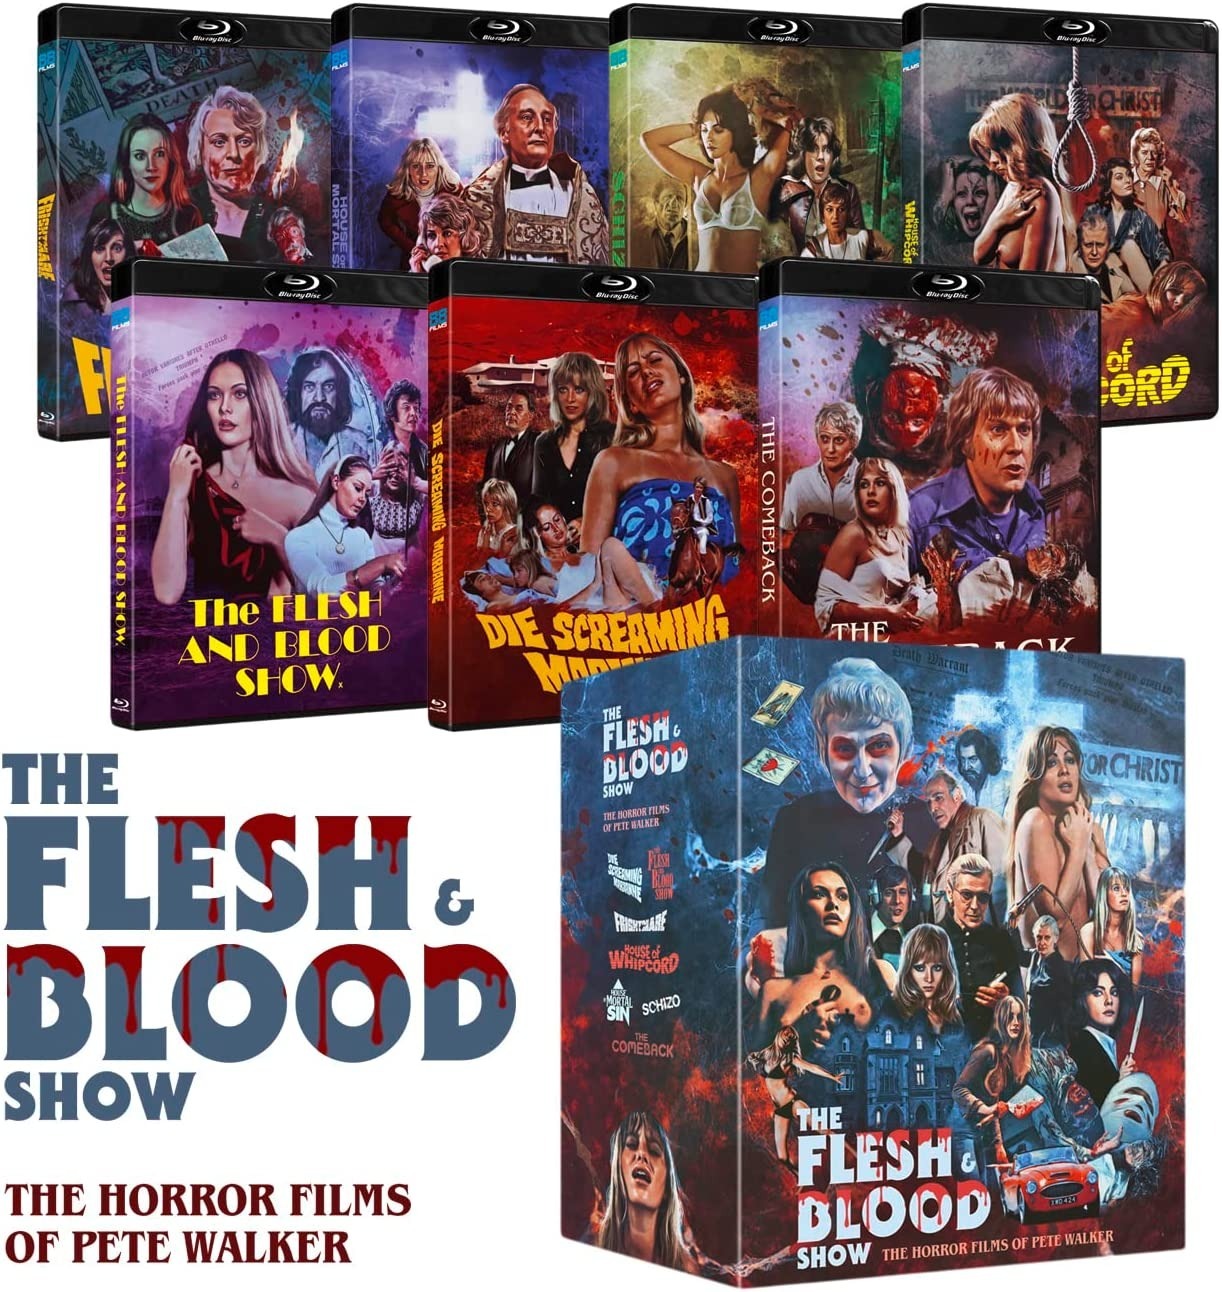 THE FLESH AND BLOOD SHOW (REGION B IMPORT) BLU-RAY [PRE-ORDER]